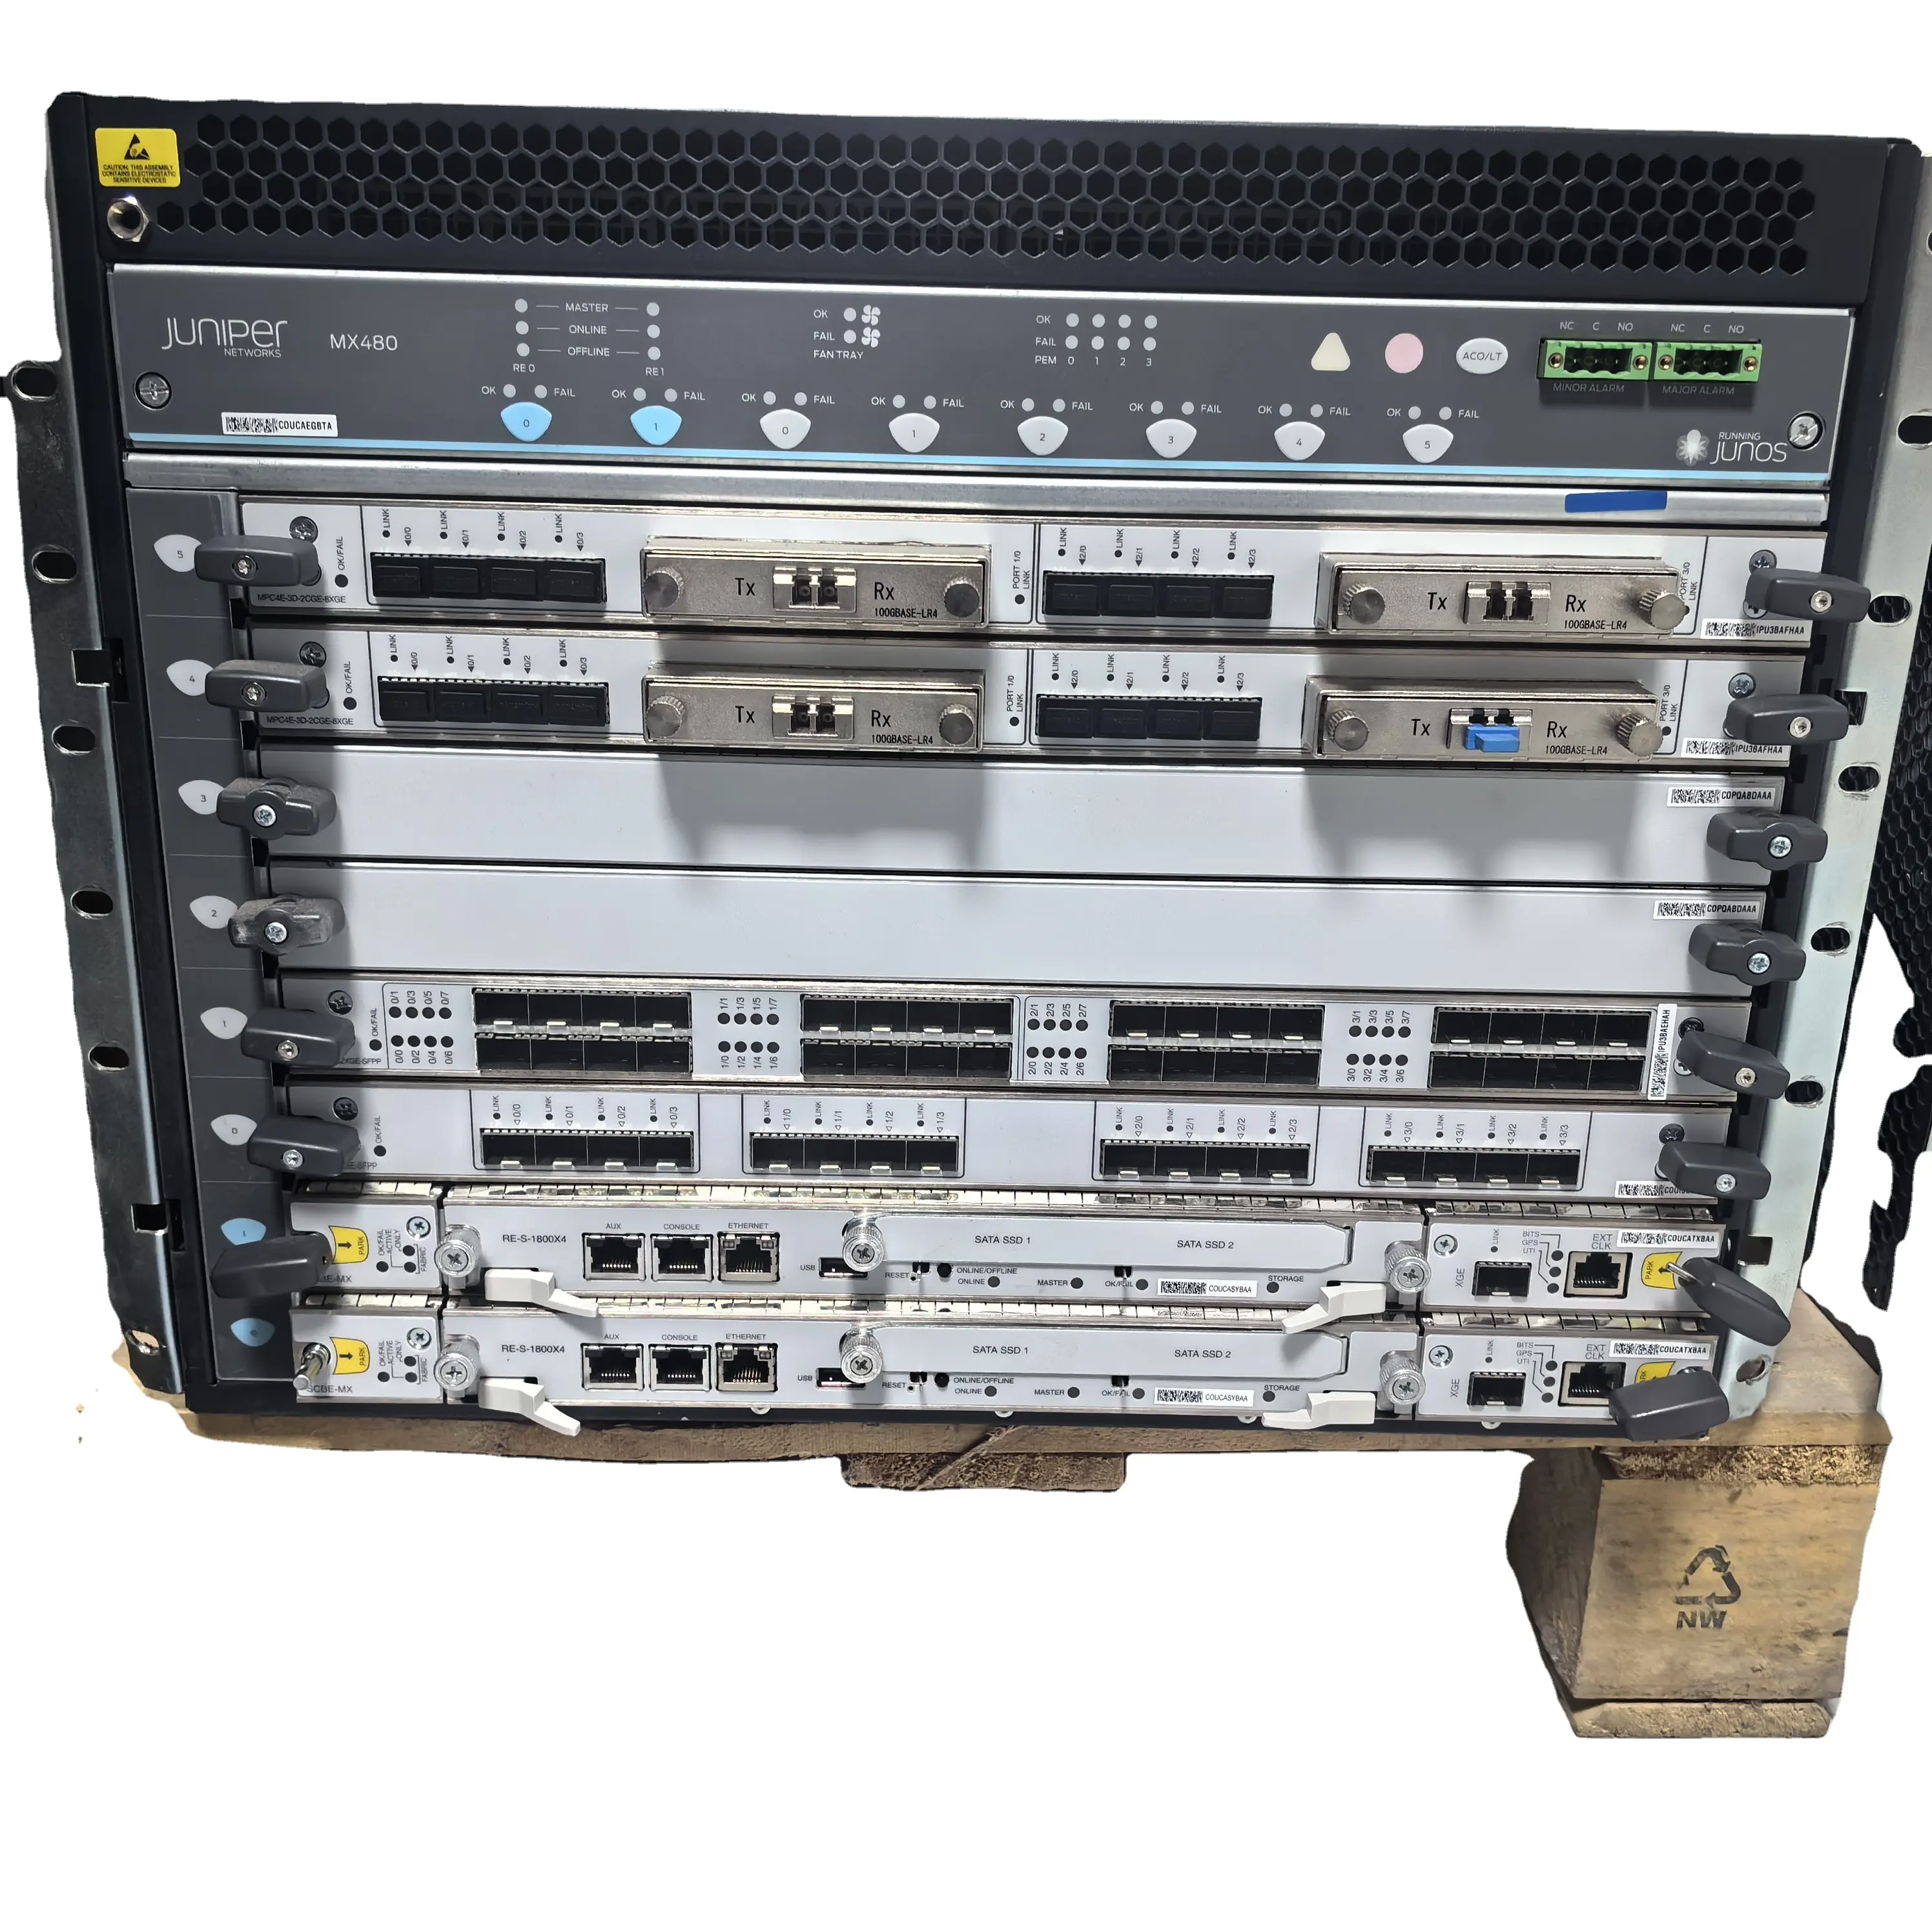 USED JUNIPER Network Routers MX480BASE-AC Contains 4 power supplies and 2 fans Business cards are not included